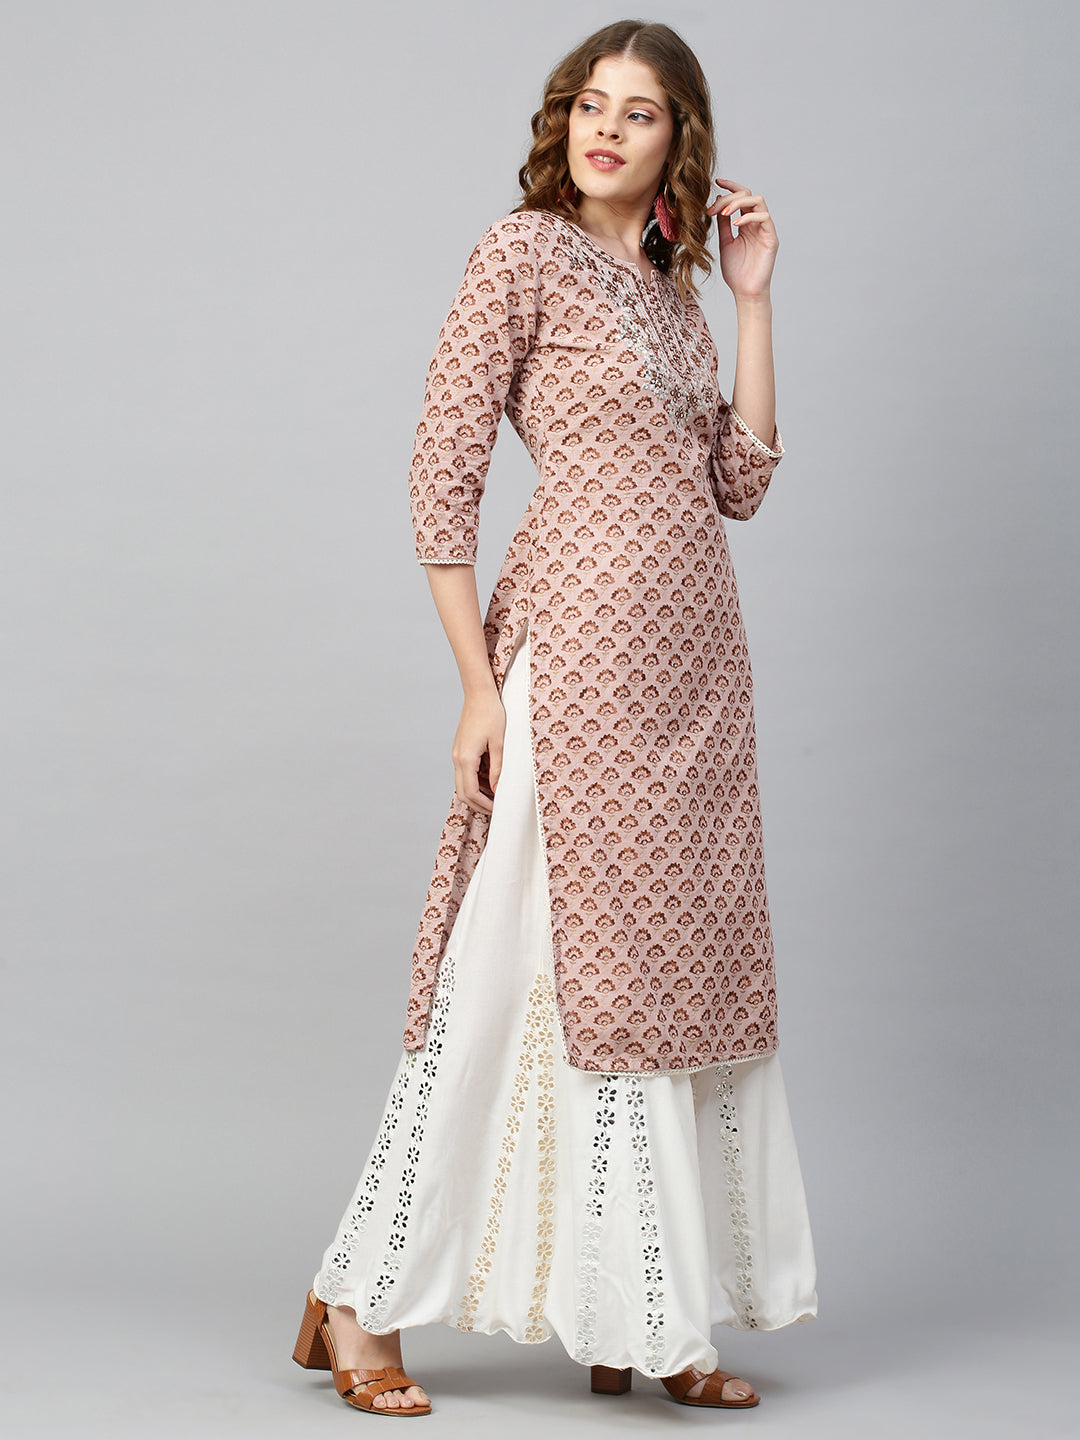 Floral Printed & Embroidered Kurta - Dusty Peach